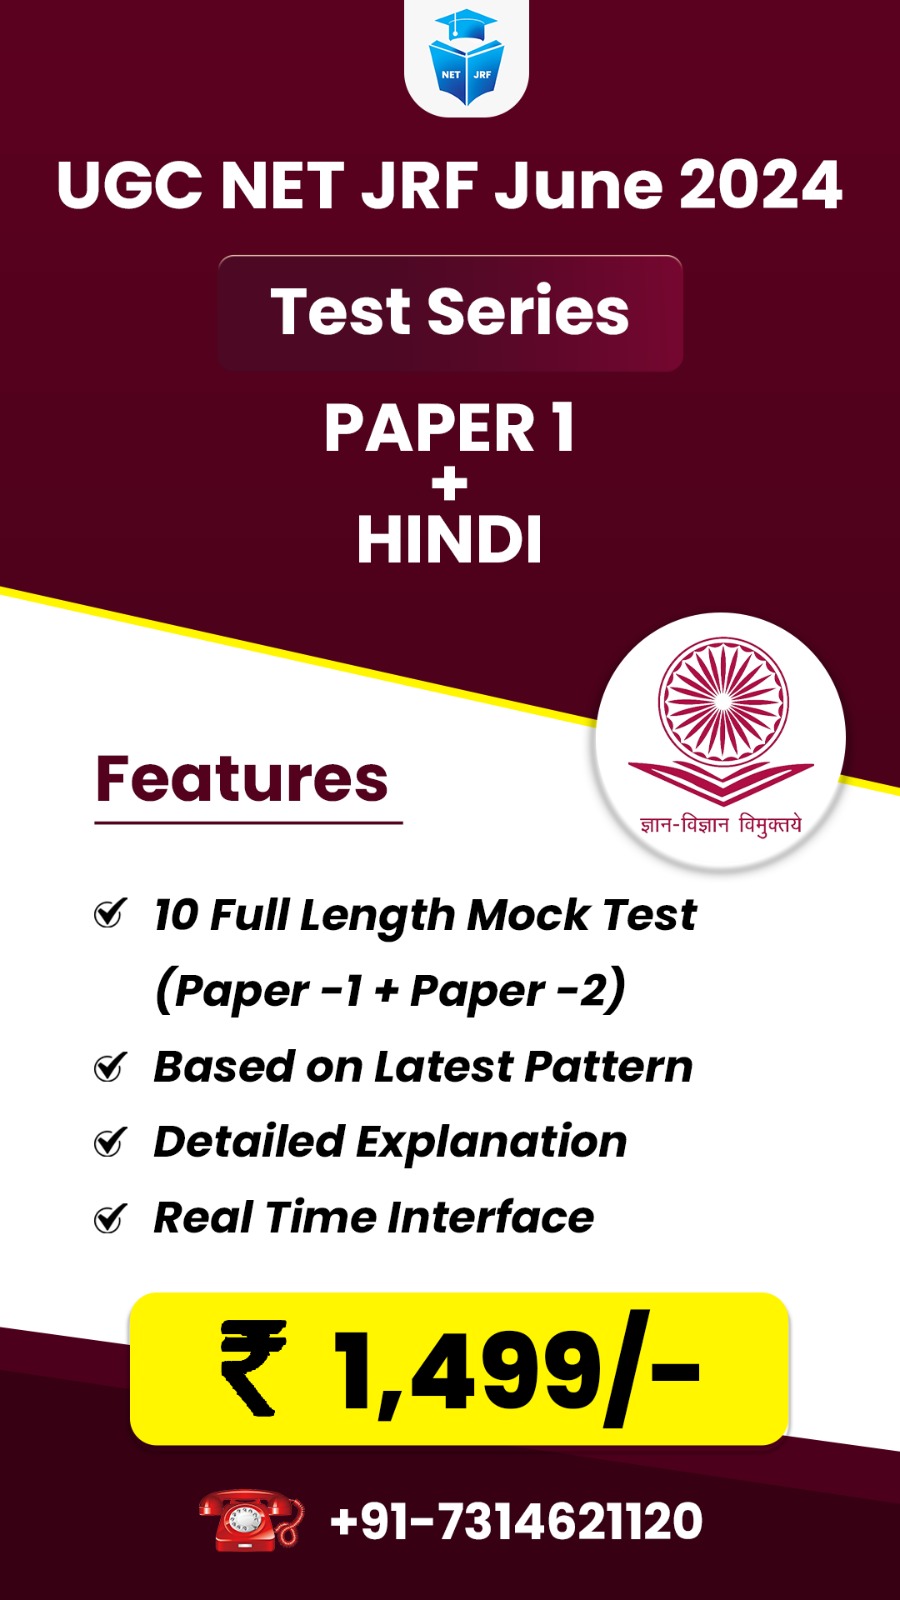 Hindi (Paper 1 + Paper 2) Test Series for June 2024